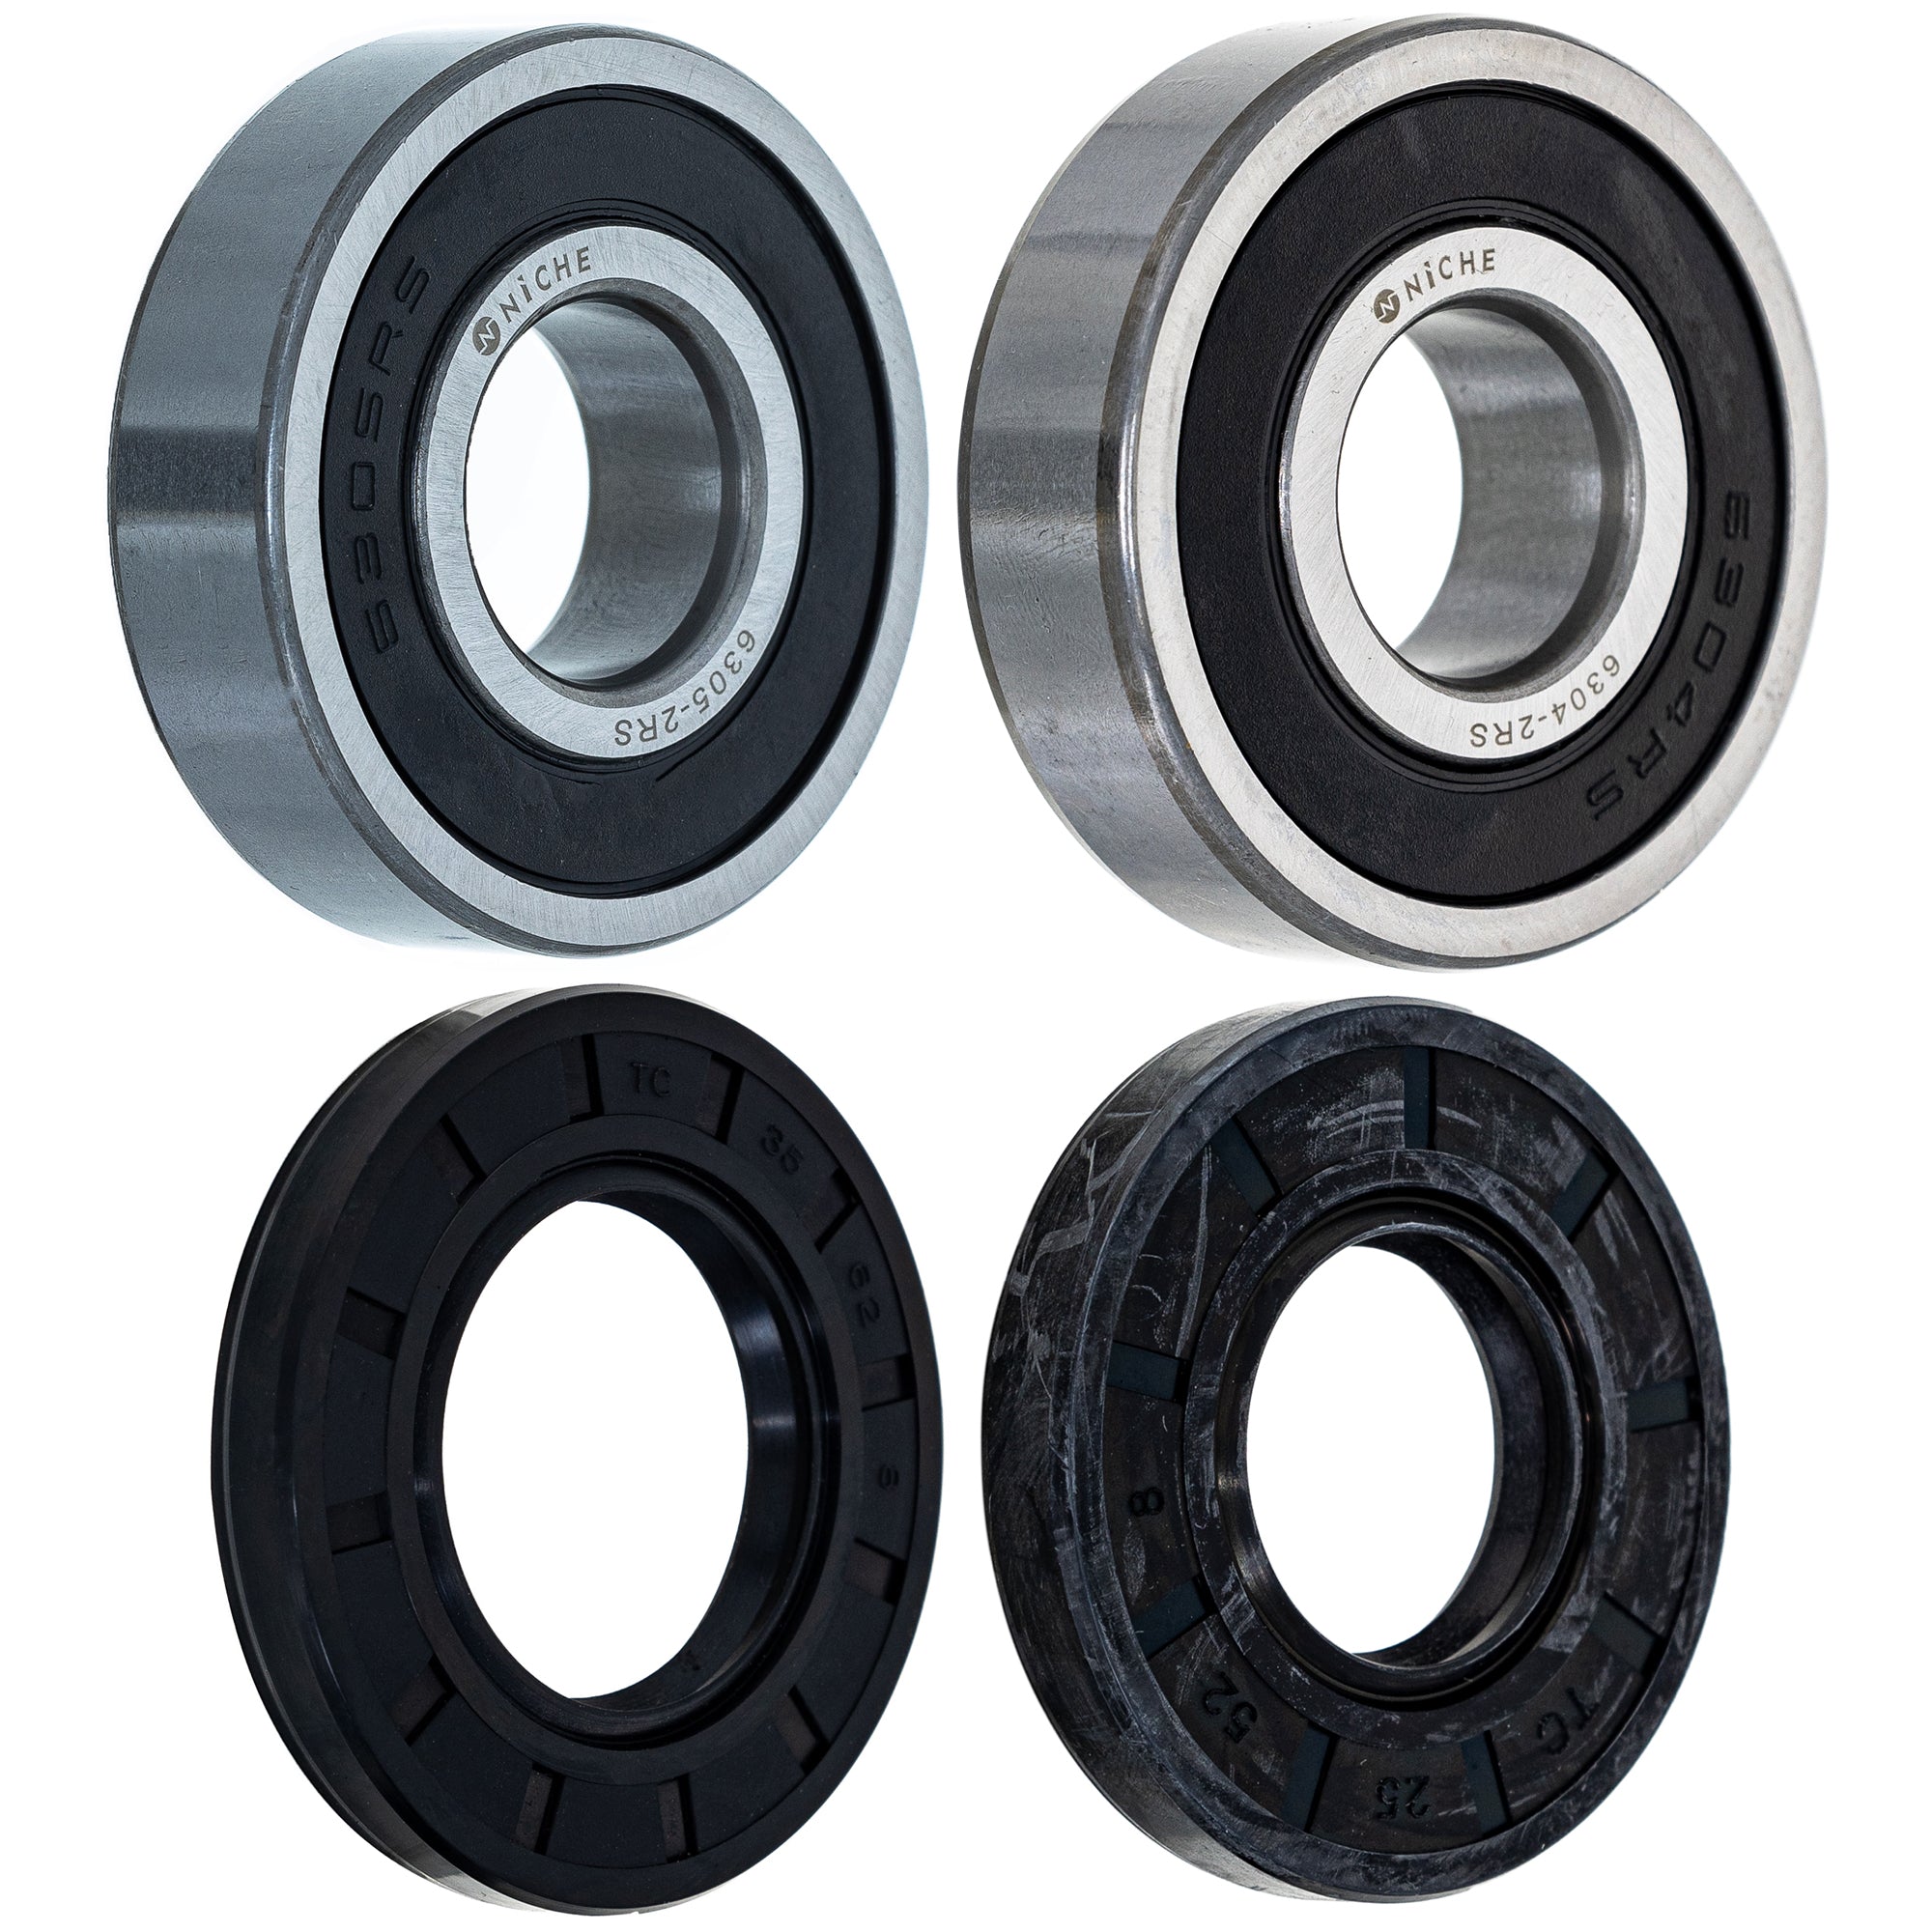 Wheel Bearing Seal Kit for zOTHER Ref No XS650 NICHE MK1008929